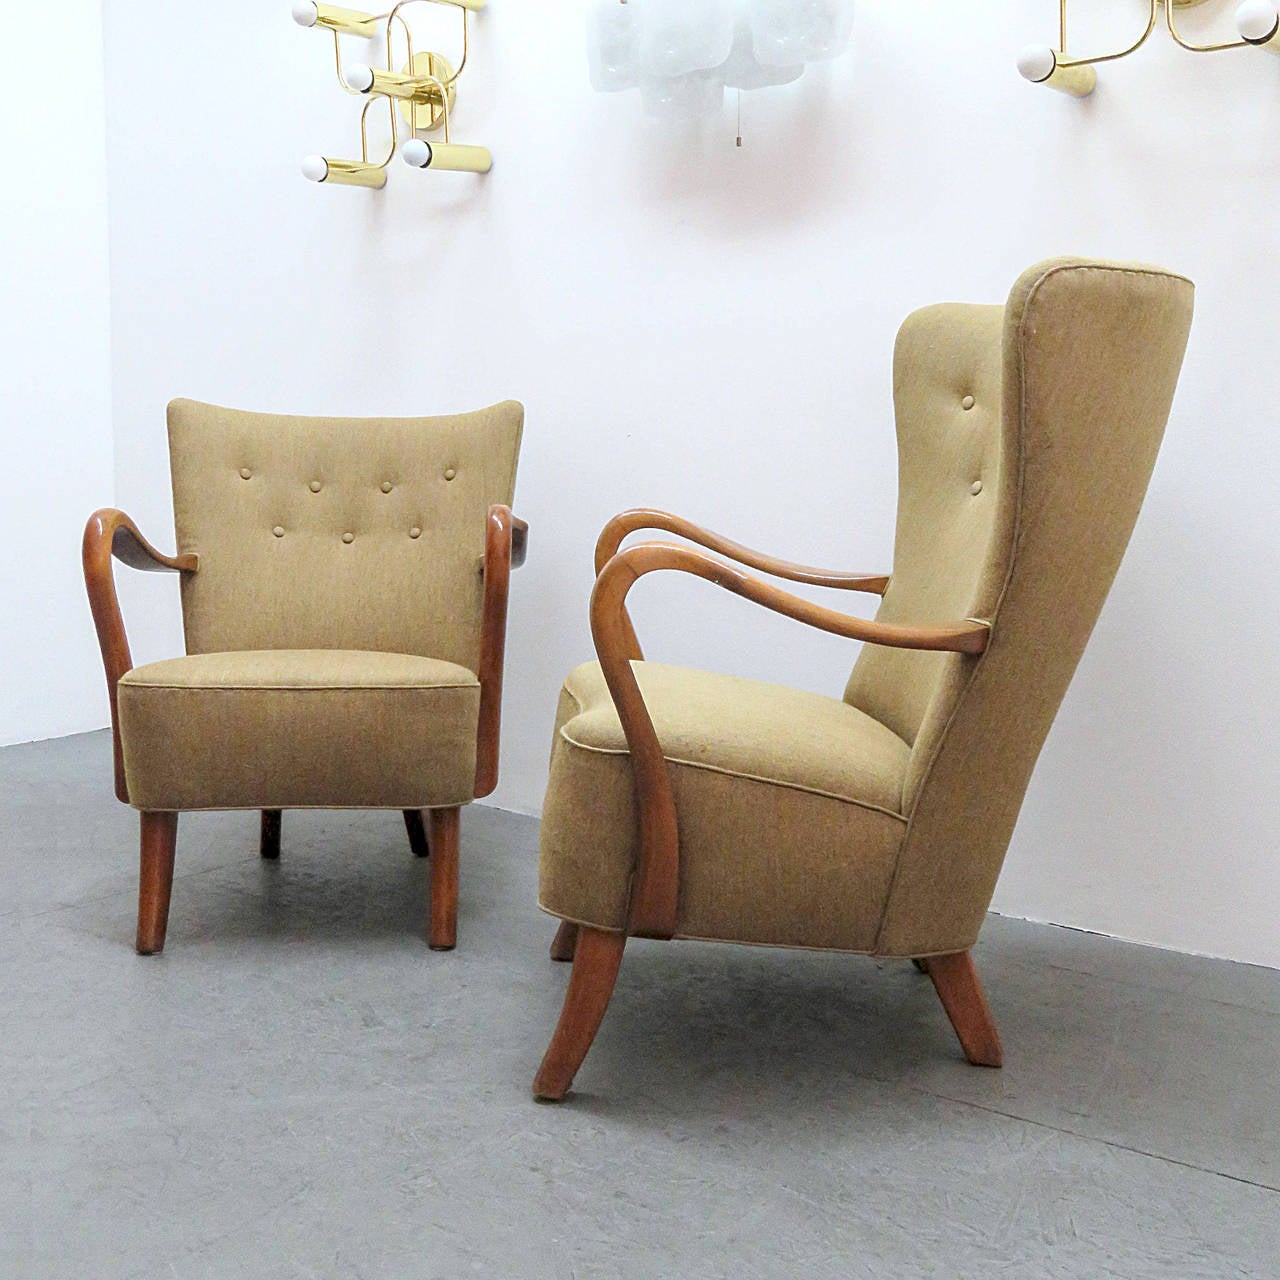 Wood Pair of Alfred Christensen Lounge Chairs, 1940